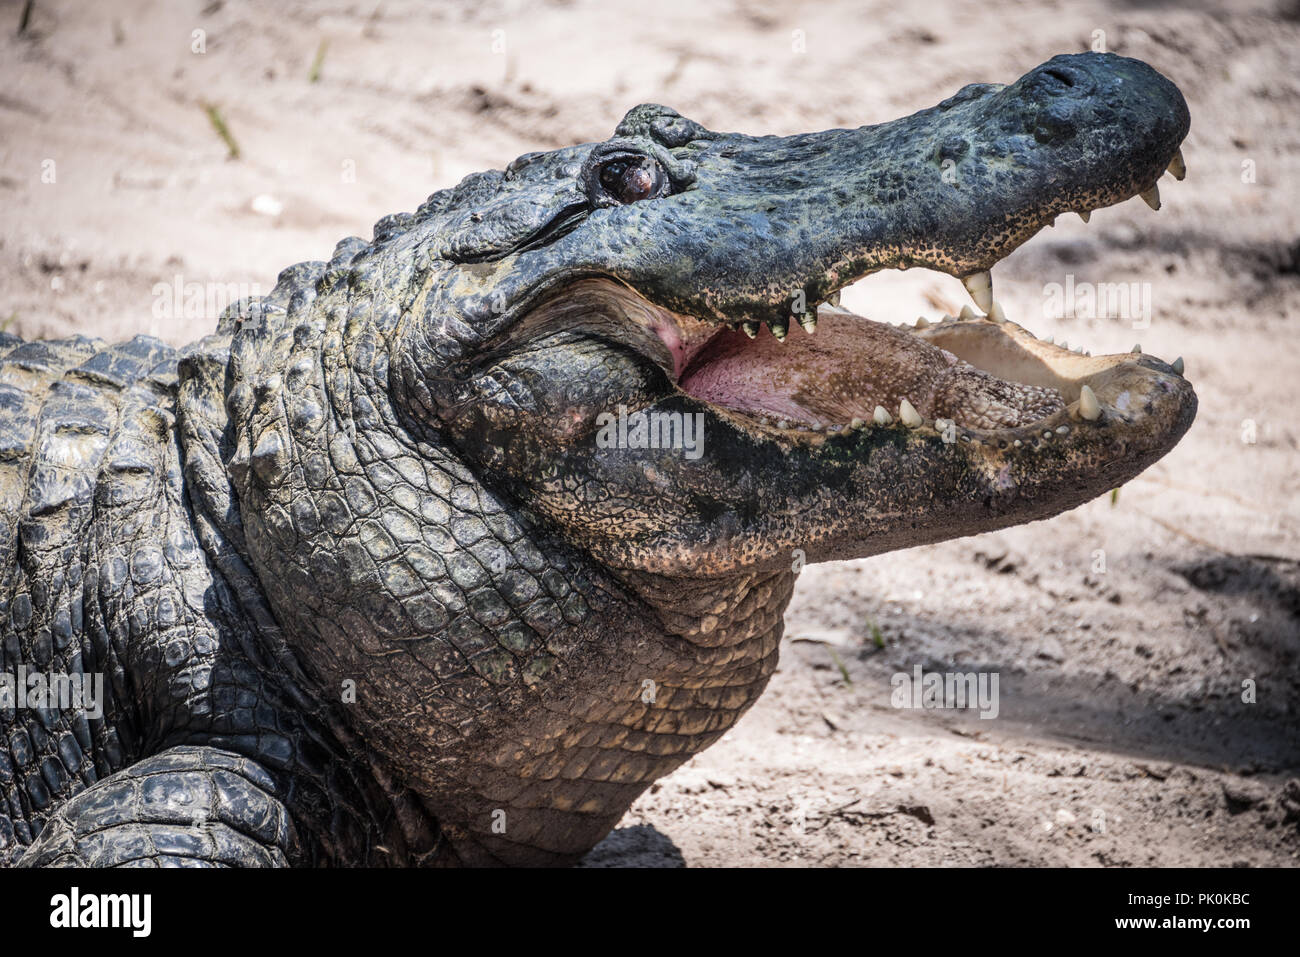 Alligator with open mouth at St. Augustine Alligator Farm Zoological Park in St. Augustine, Florida. (USA) Stock Photo